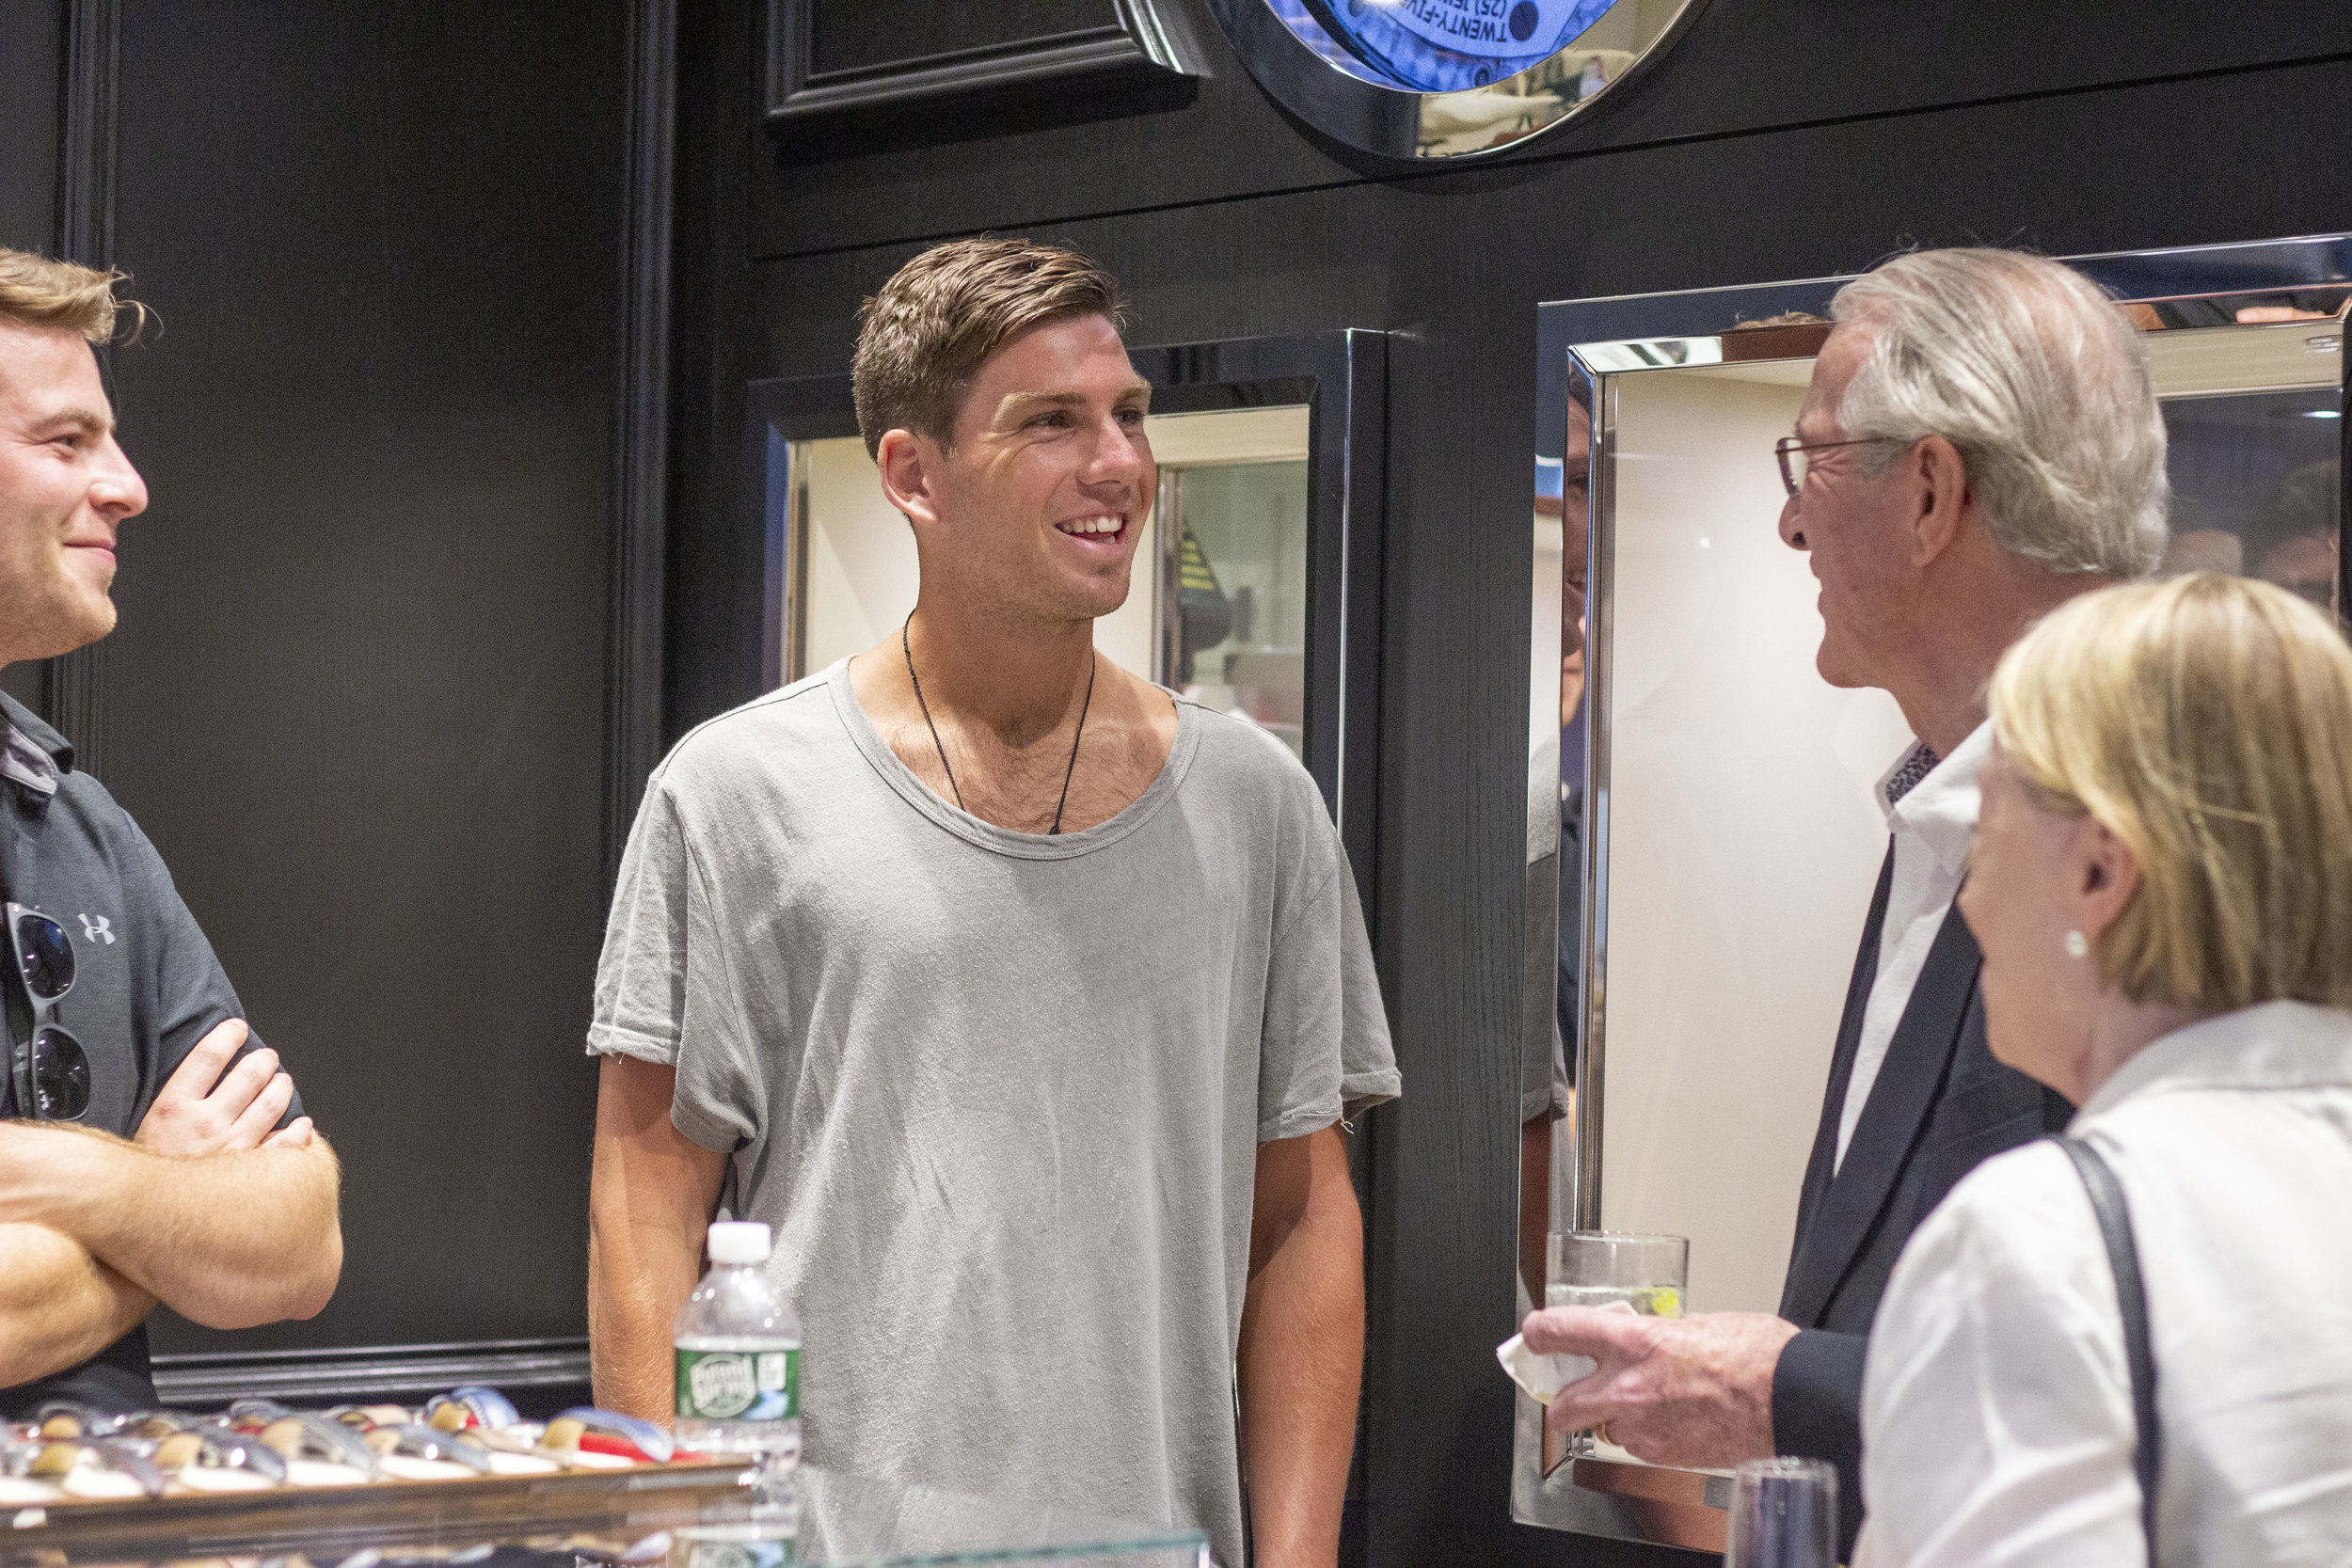 AN EVENING WITH CAMERON NORRIE